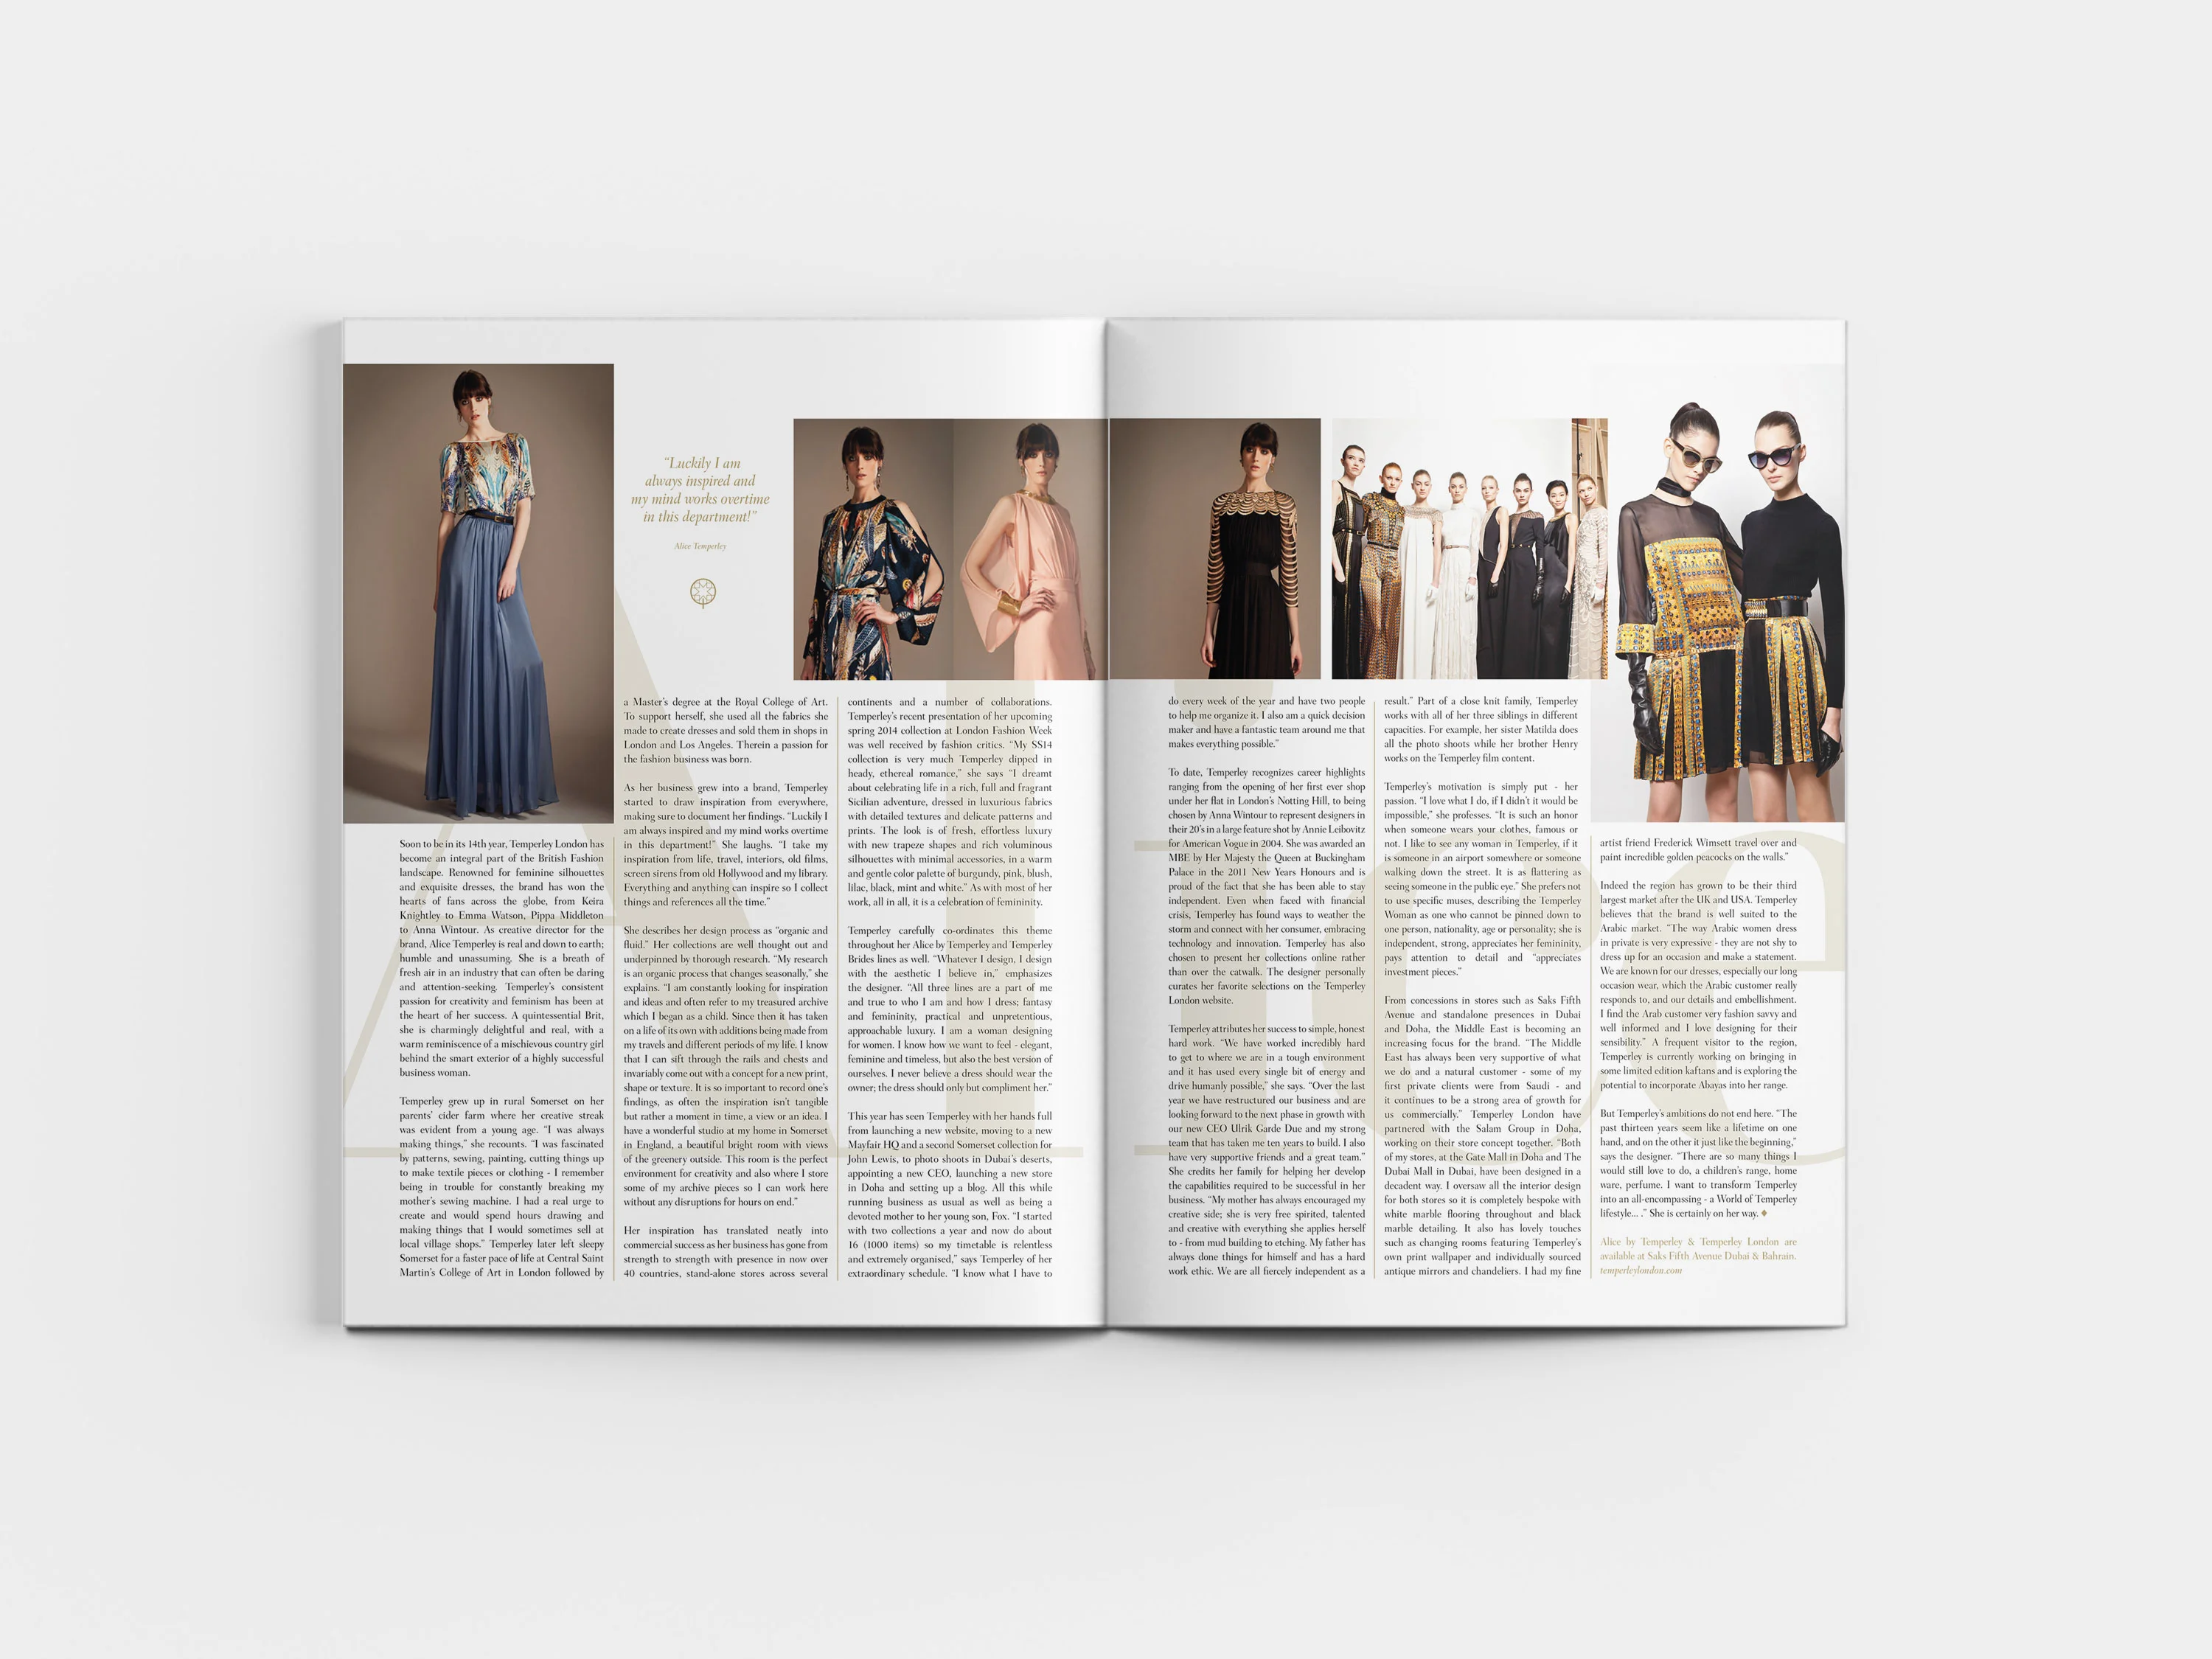 another spread from Masquerade Magazine about the designer Alice Temperley